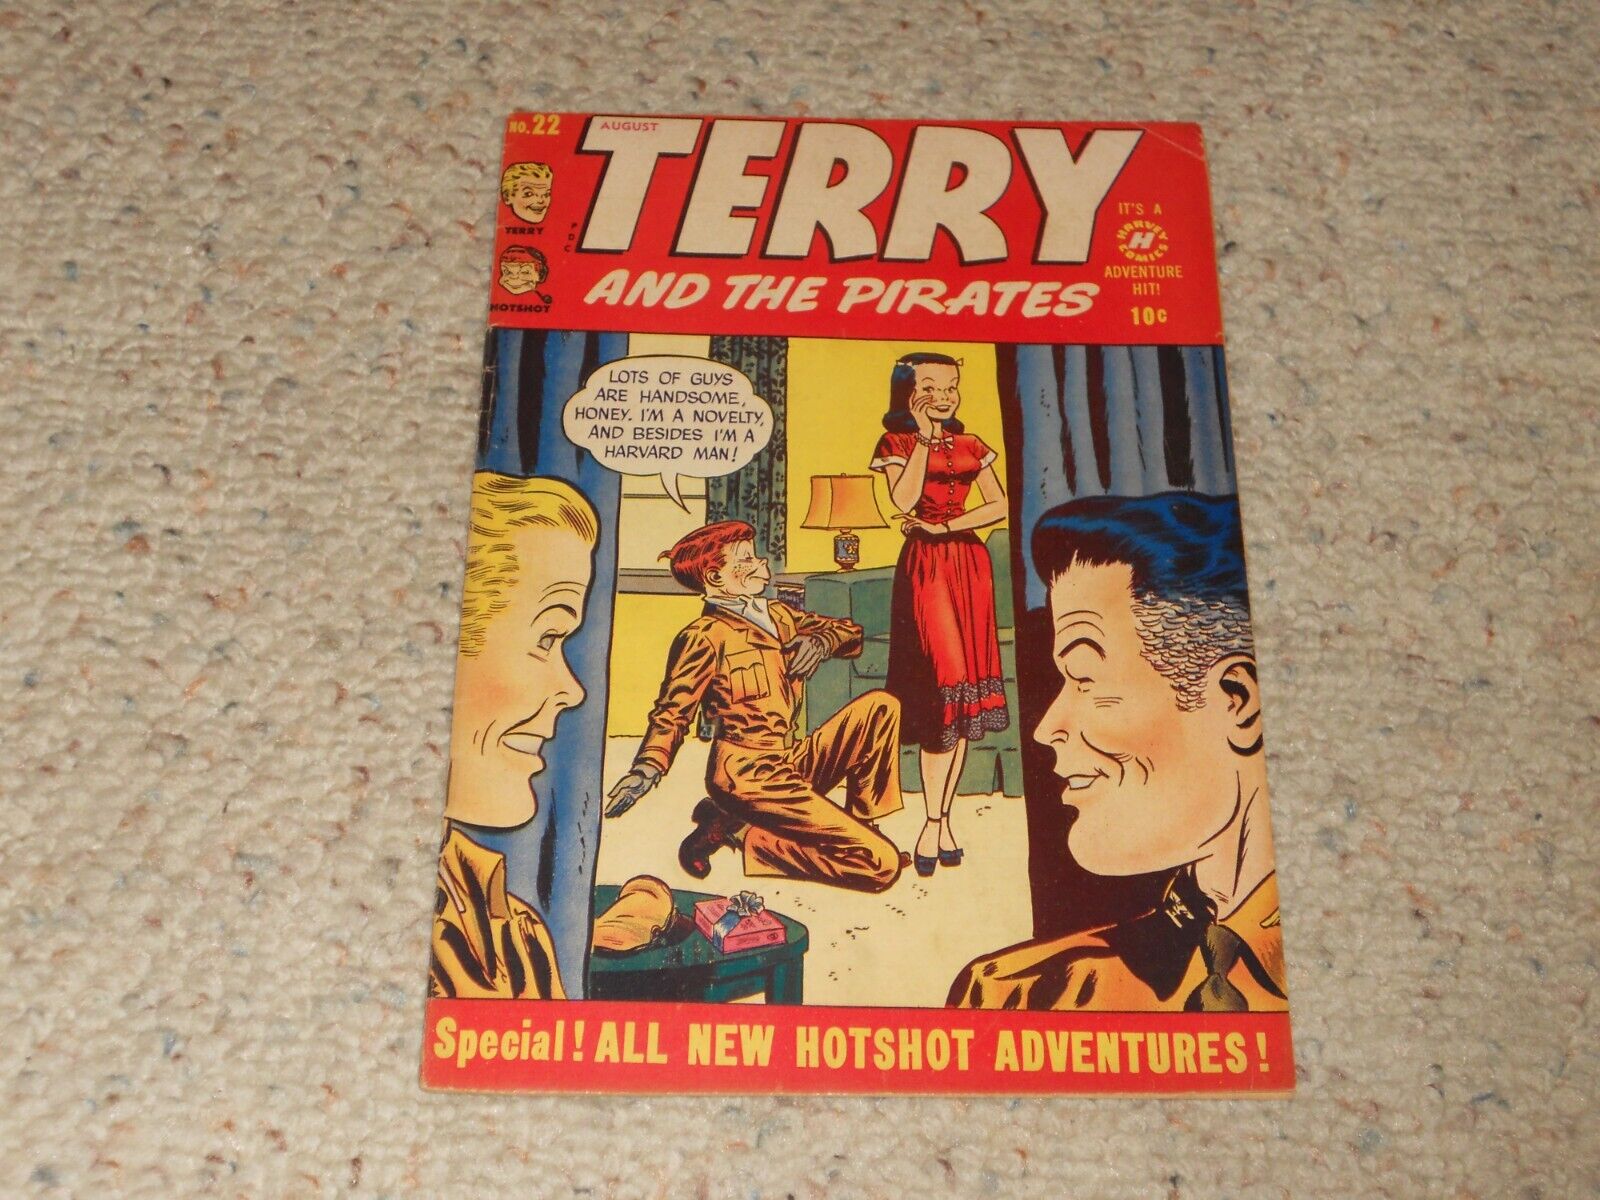 1950 Terry and the Pirates Harvey Comic Book #22 - SUDDEN DEPARTURE-Nice Copy